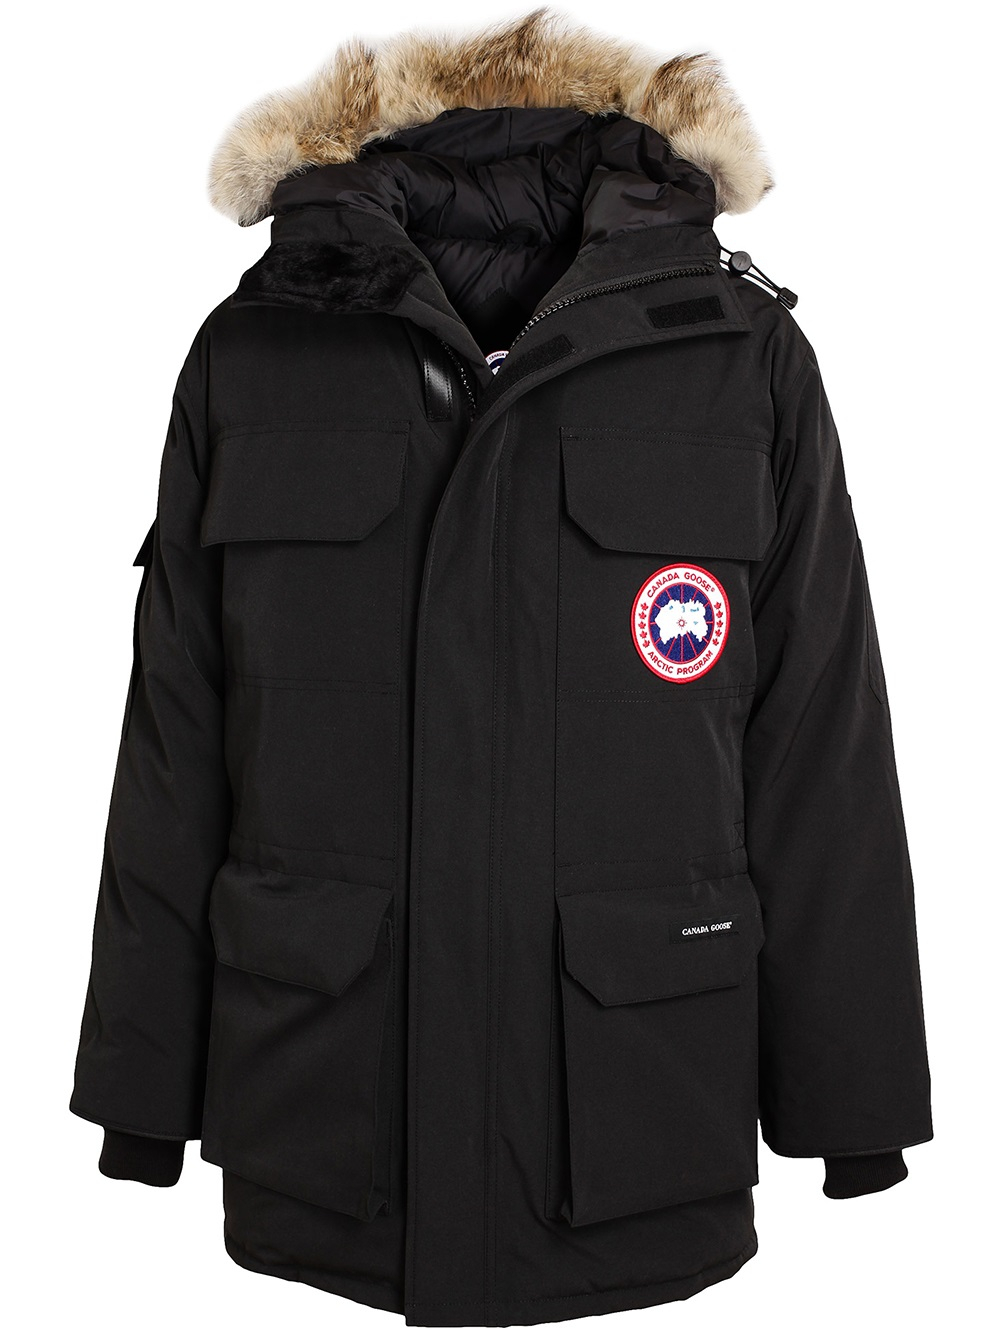 Lyst - Canada Goose 'expedition' Parka in Black for Men